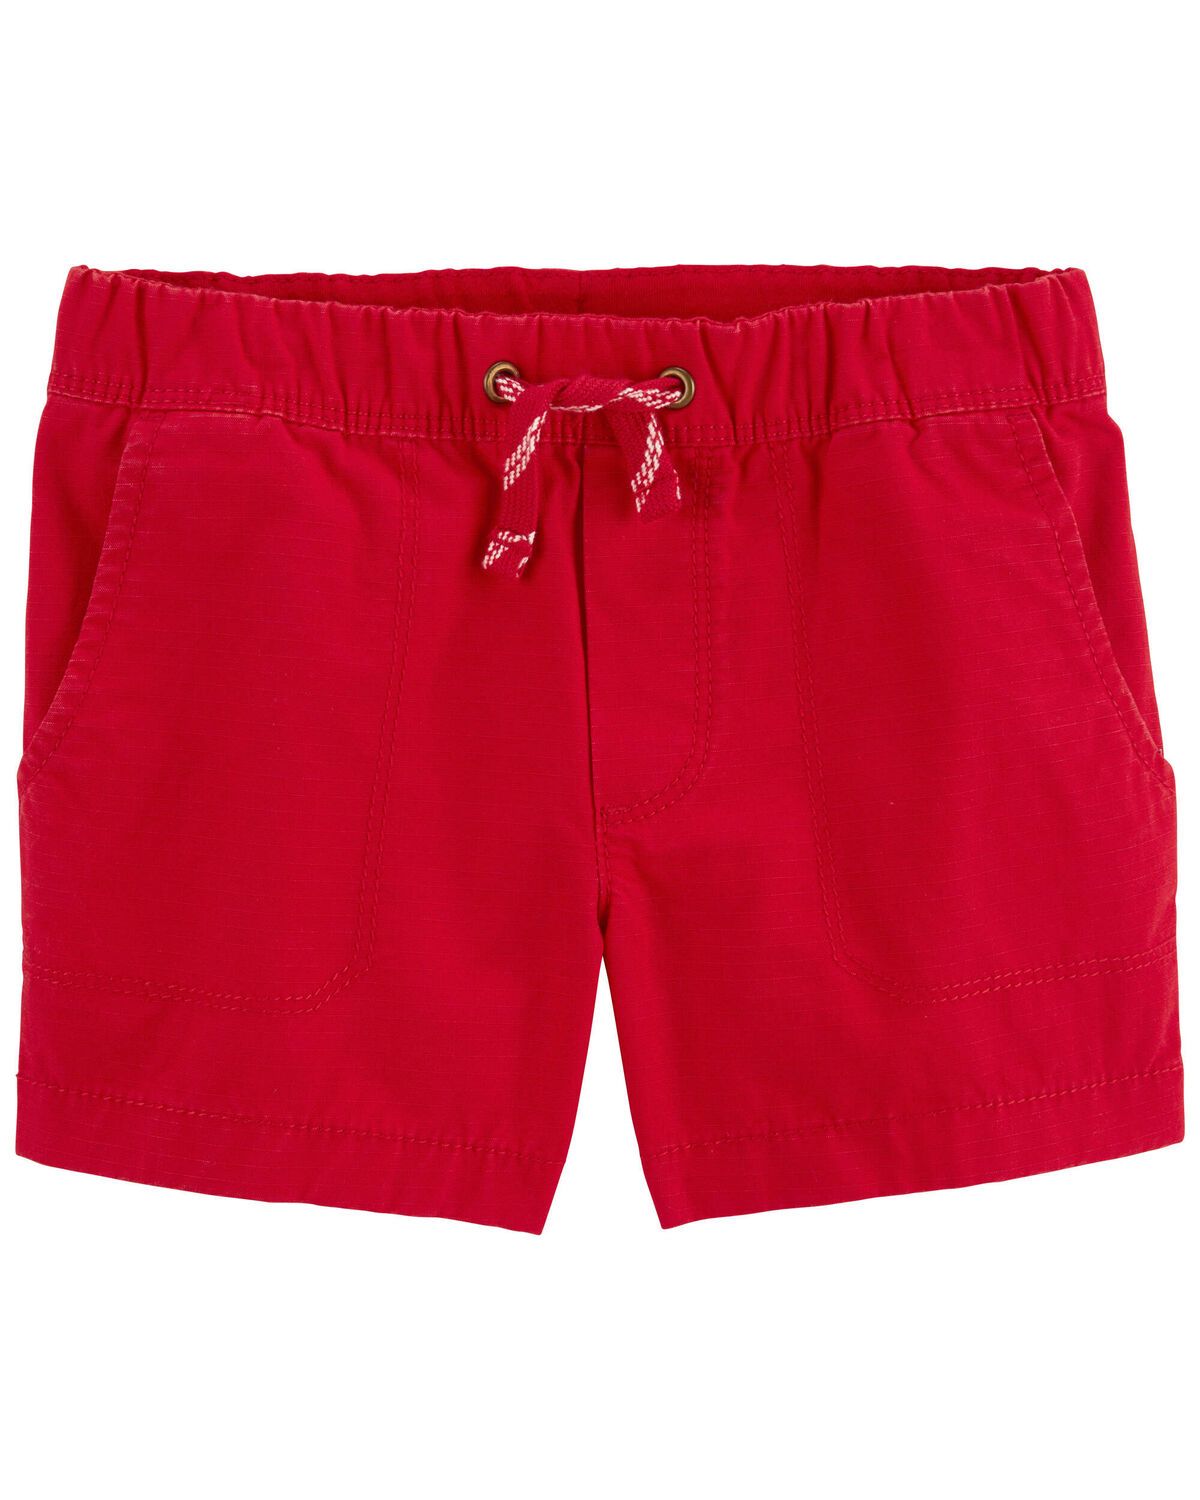 Red Toddler Pull-On Terrain Shorts | carters.com | Carter's